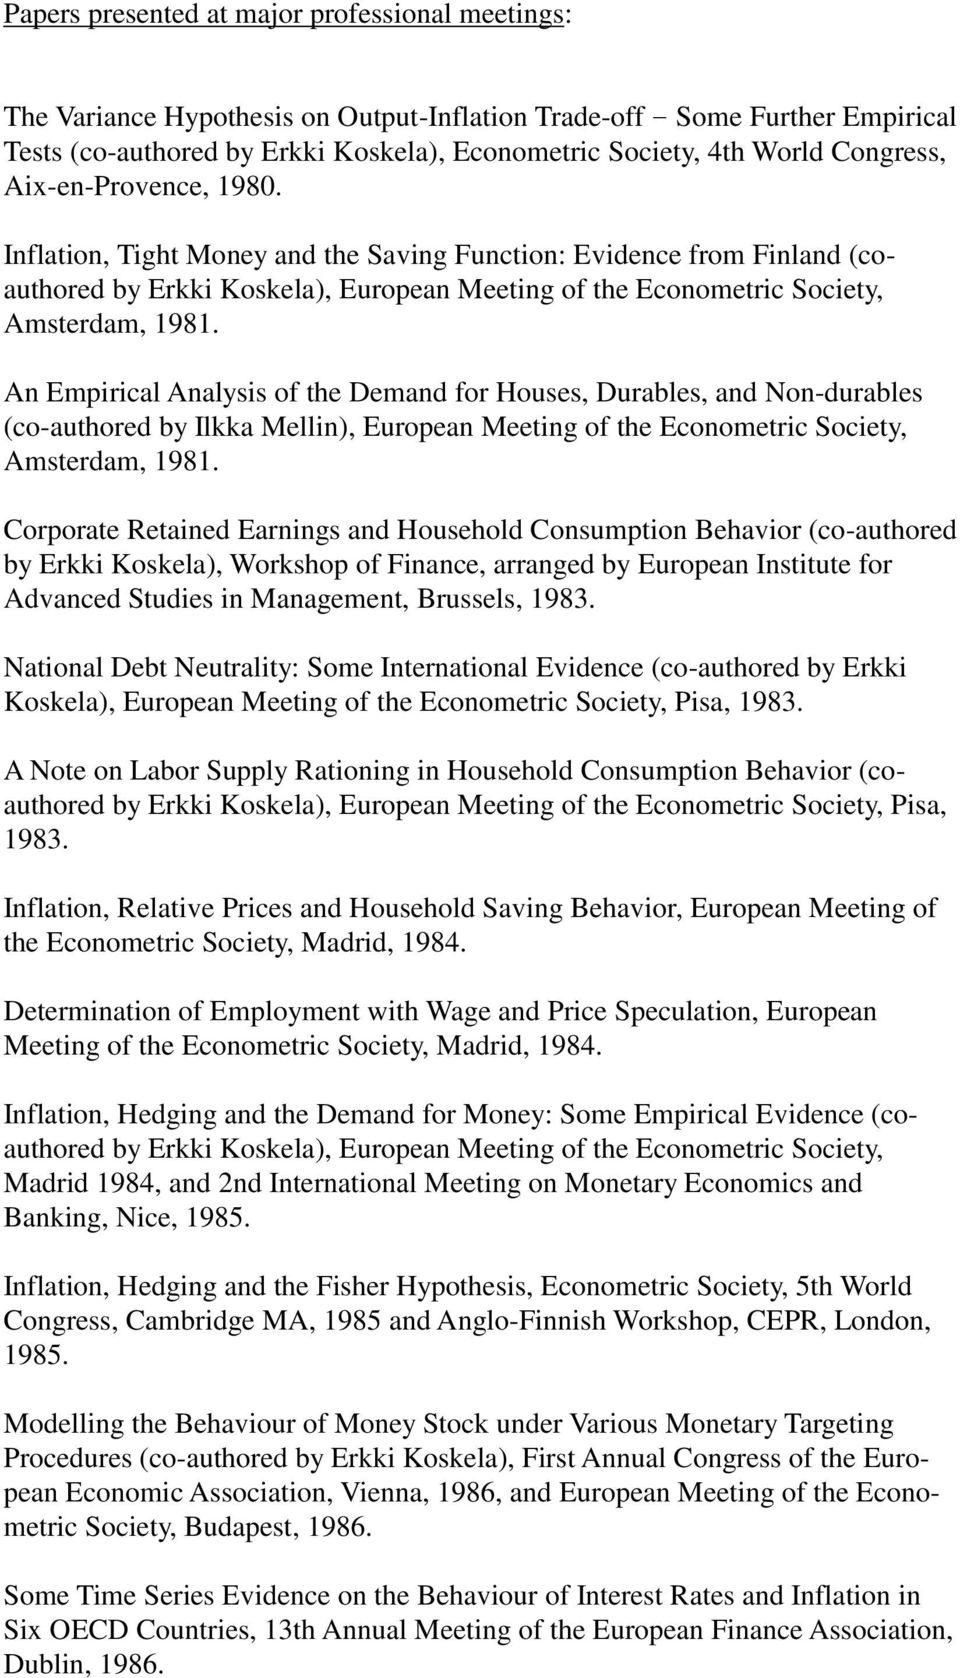 An Empirical Analysis of the Demand for Houses, Durables, and Non-durables (co-authored by Ilkka Mellin), European Meeting of the Econometric Society, Amsterdam, 1981.